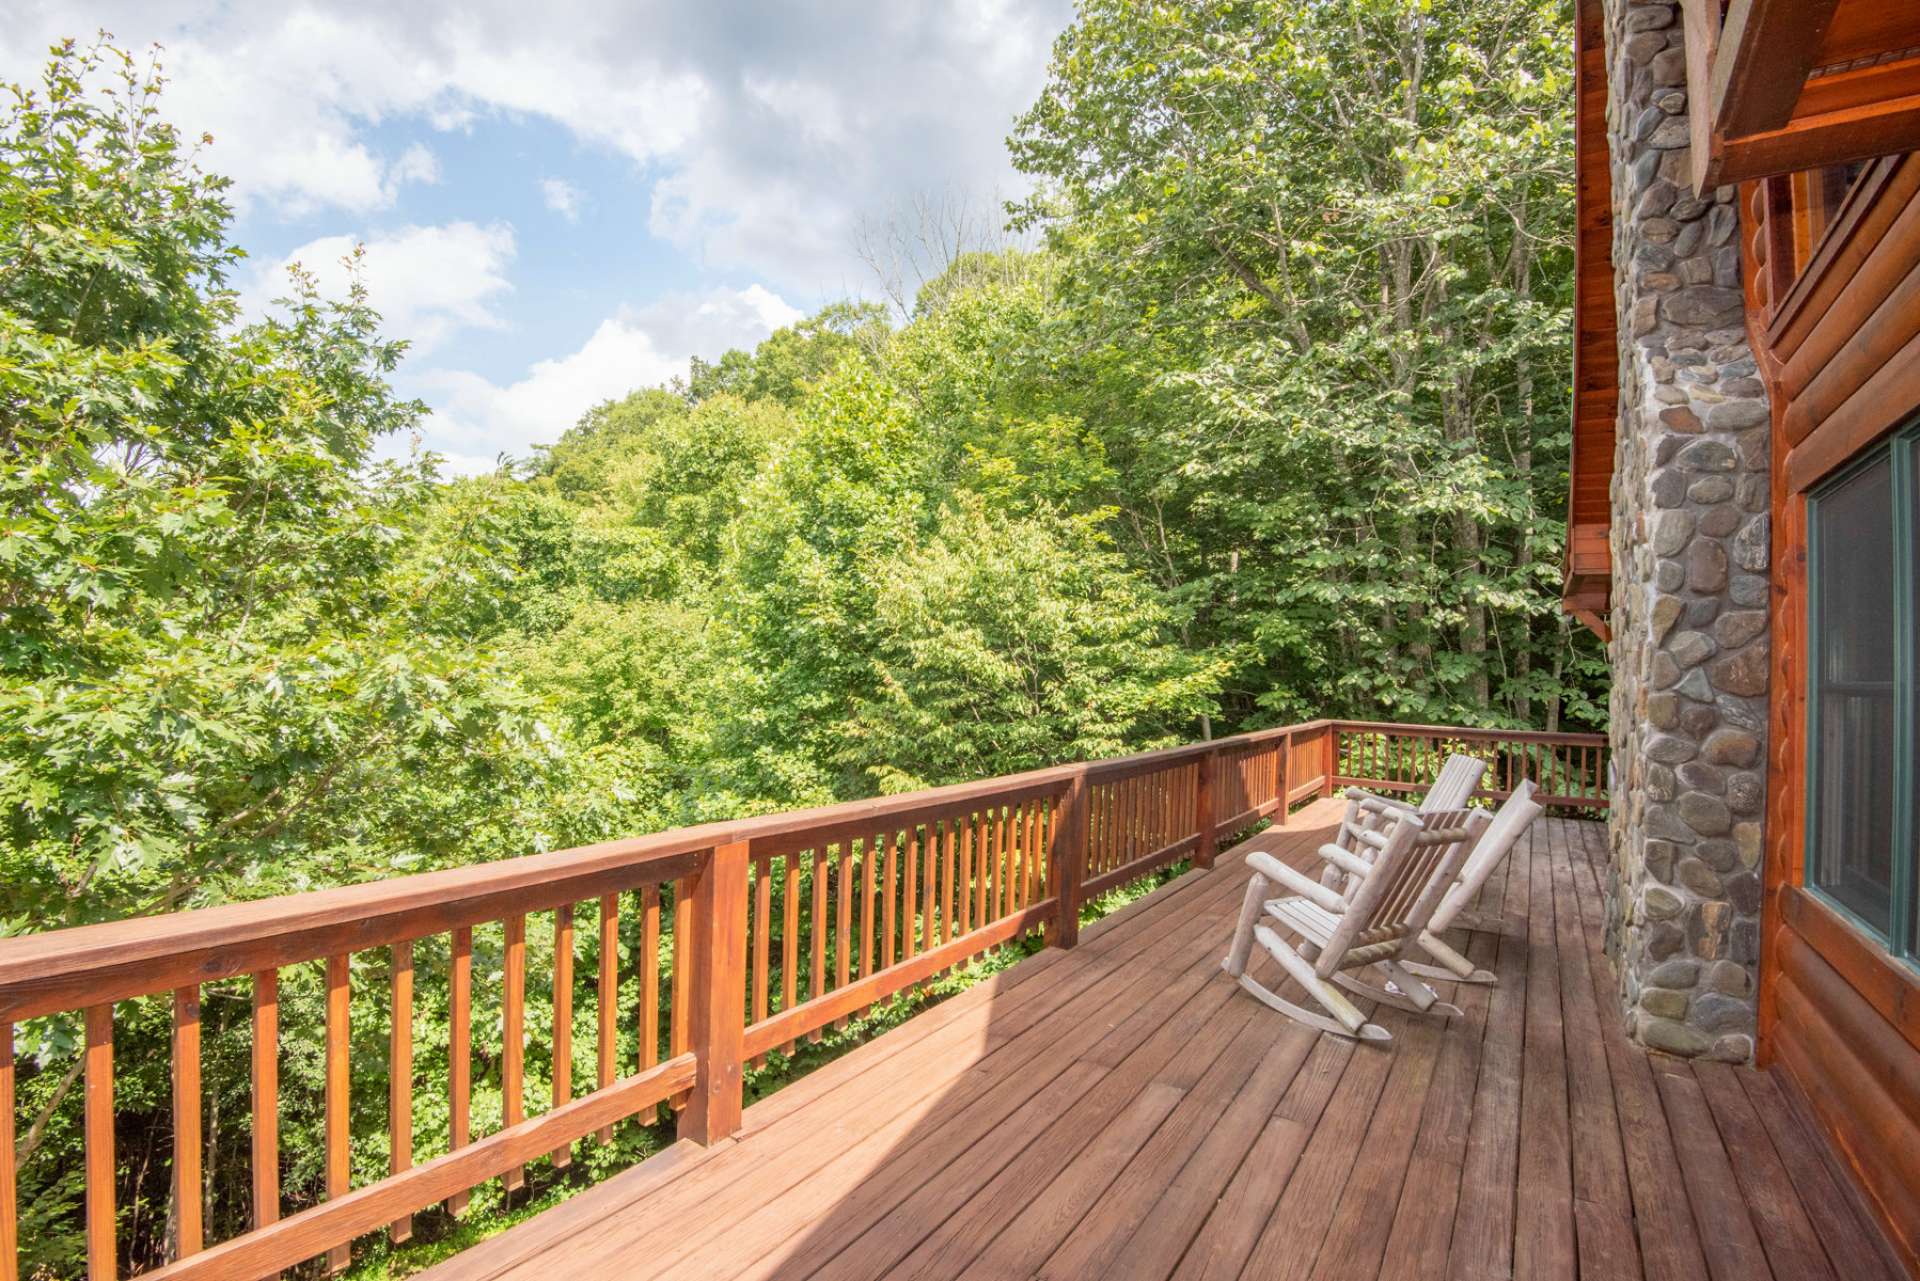 Relax on either of the covered porches and enjoy the fresh mountain air and the sounds of the mountain brook flowing below.